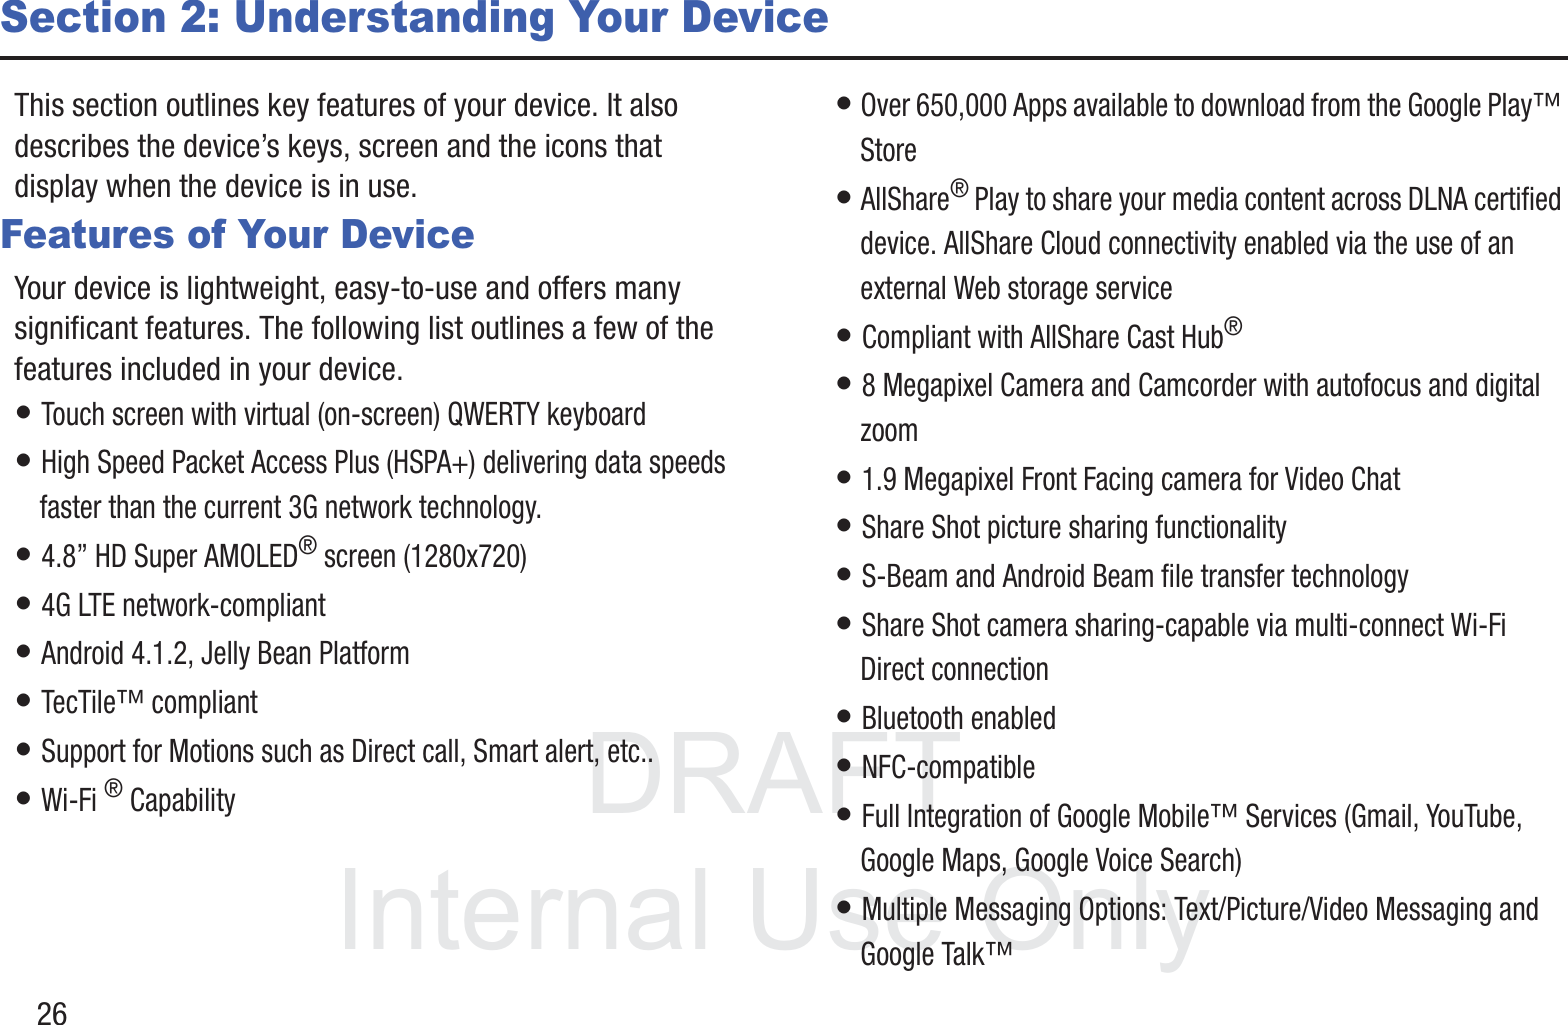 DRAFT InternalUse Only26Section 2: Understanding Your DeviceThis section outlines key features of your device. It also describes the device’s keys, screen and the icons that display when the device is in use.Features of Your DeviceYour device is lightweight, easy-to-use and offers many significant features. The following list outlines a few of the features included in your device.• Touch screen with virtual (on-screen) QWERTY keyboard• High Speed Packet Access Plus (HSPA+) delivering data speeds faster than the current 3G network technology.• 4.8” HD Super AMOLED® screen (1280x720)• 4G LTE network-compliant• Android 4.1.2, Jelly Bean Platform• TecTile™ compliant• Support for Motions such as Direct call, Smart alert, etc..• Wi-Fi ® Capability• Over 650,000 Apps available to download from the Google Play™ Store• AllShare® Play to share your media content across DLNA certified device. AllShare Cloud connectivity enabled via the use of an external Web storage service• Compliant with AllShare Cast Hub® • 8 Megapixel Camera and Camcorder with autofocus and digital zoom• 1.9 Megapixel Front Facing camera for Video Chat• Share Shot picture sharing functionality• S-Beam and Android Beam file transfer technology• Share Shot camera sharing-capable via multi-connect Wi-Fi Direct connection• Bluetooth enabled• NFC-compatible• Full Integration of Google Mobile™ Services (Gmail, YouTube, Google Maps, Google Voice Search)• Multiple Messaging Options: Text/Picture/Video Messaging and Google Talk™